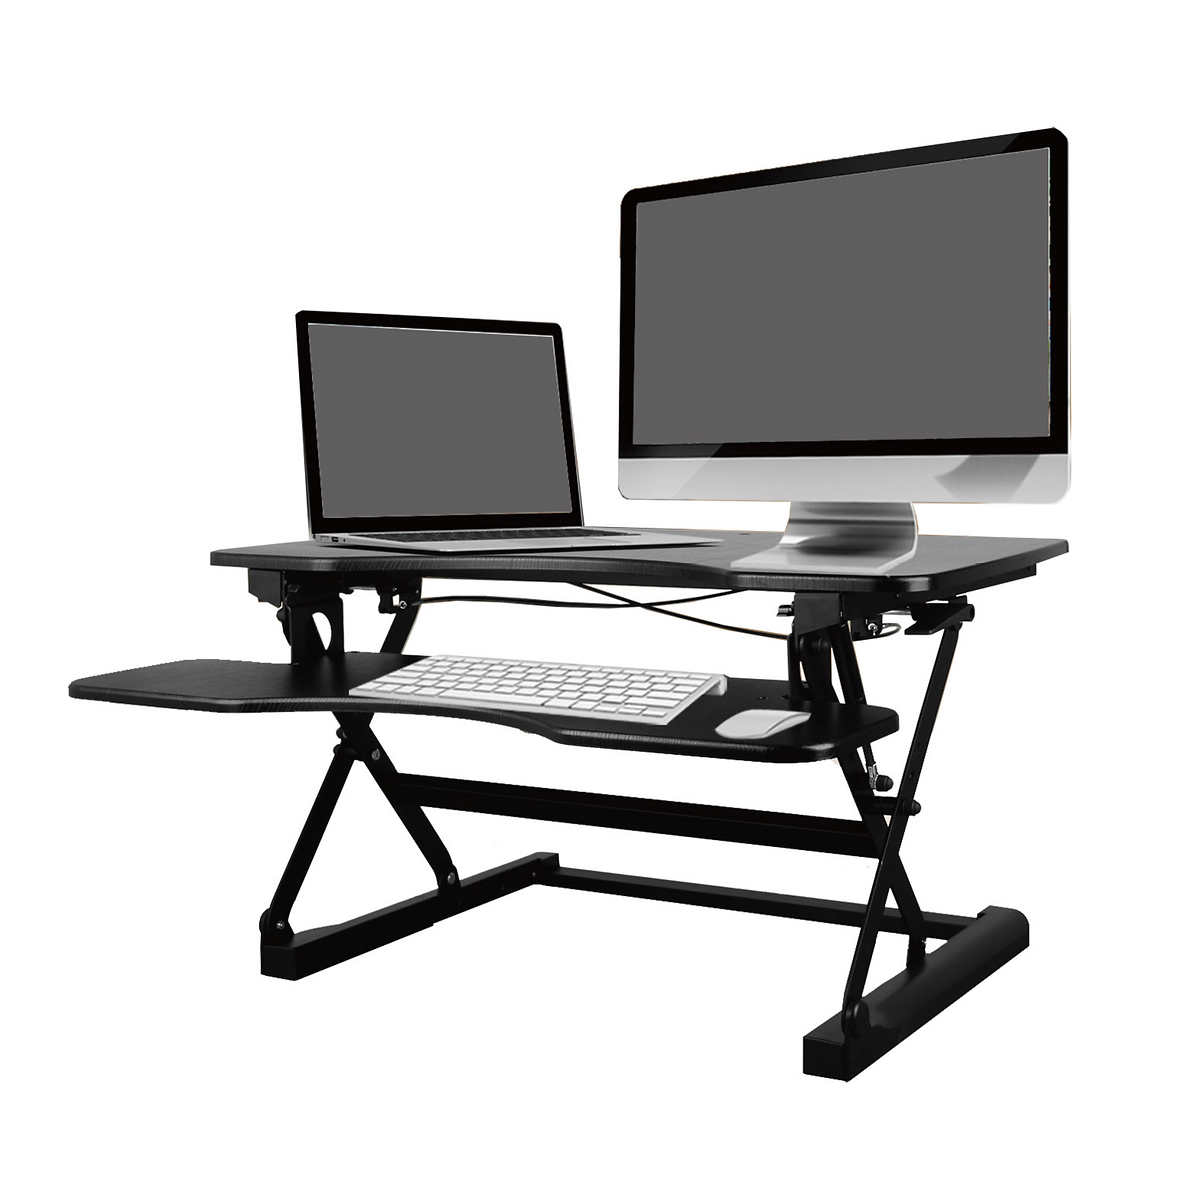 Tygerclaw Black Sit And Stand Adjustable Desk Riser